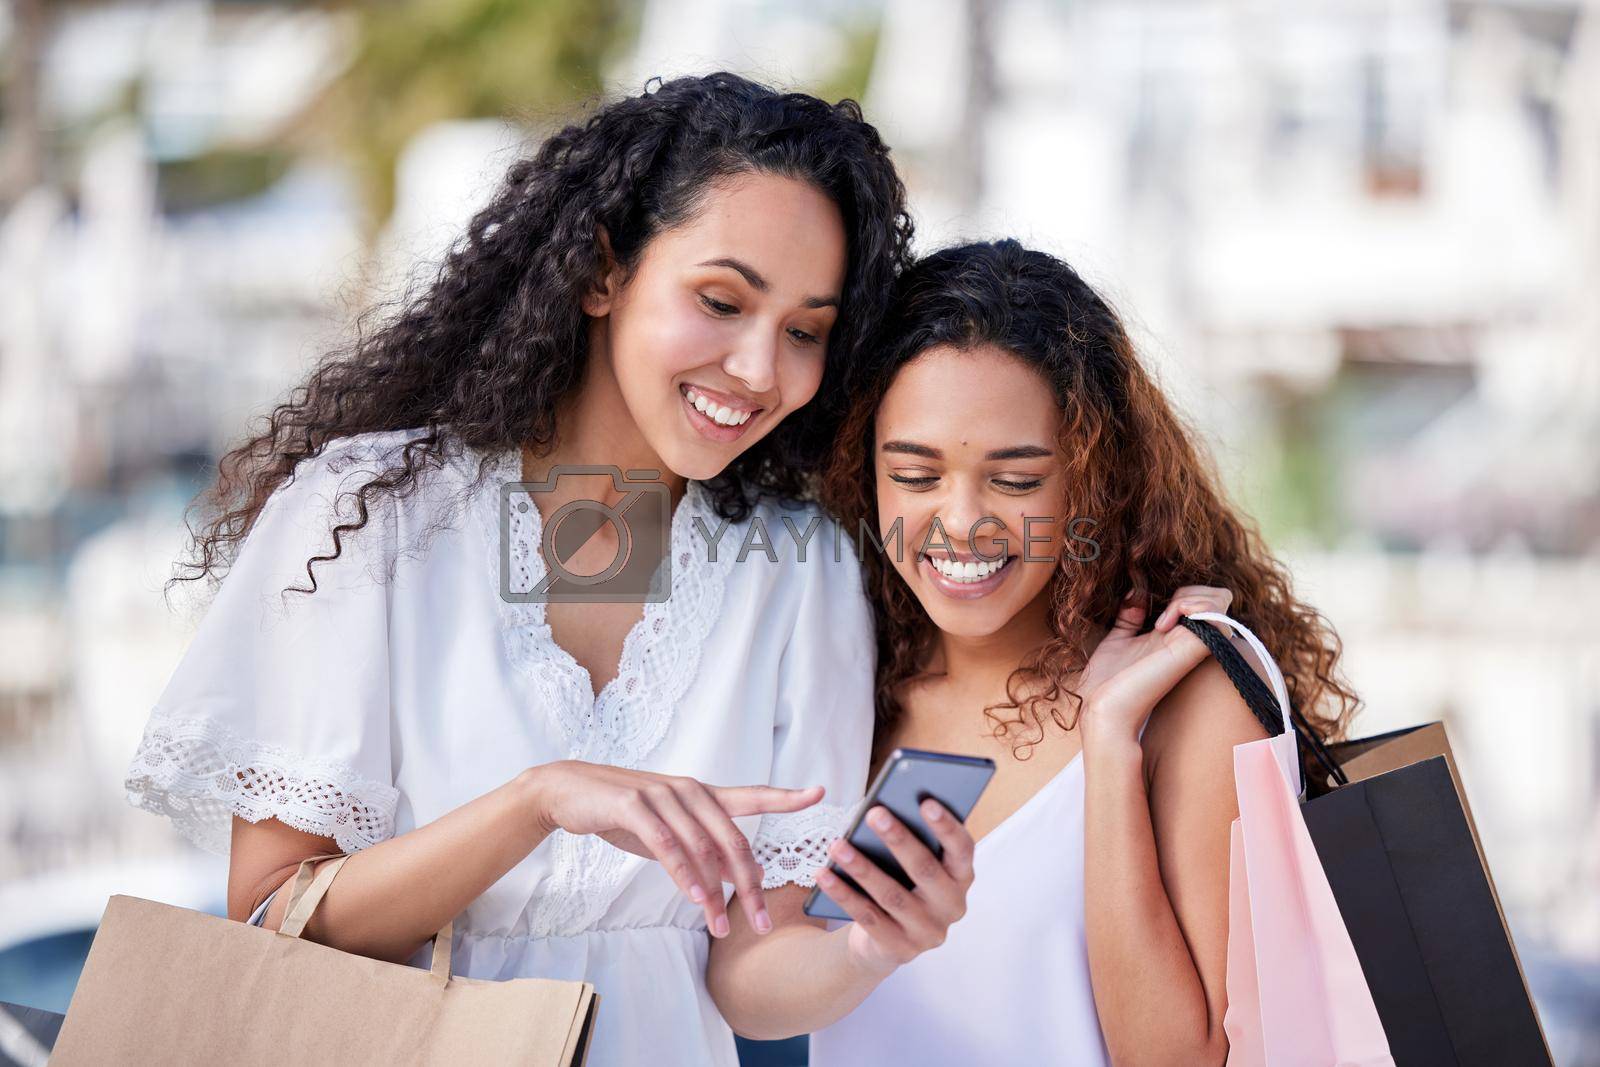 Shot of two young women using a smartphone while shopping against an urban background.